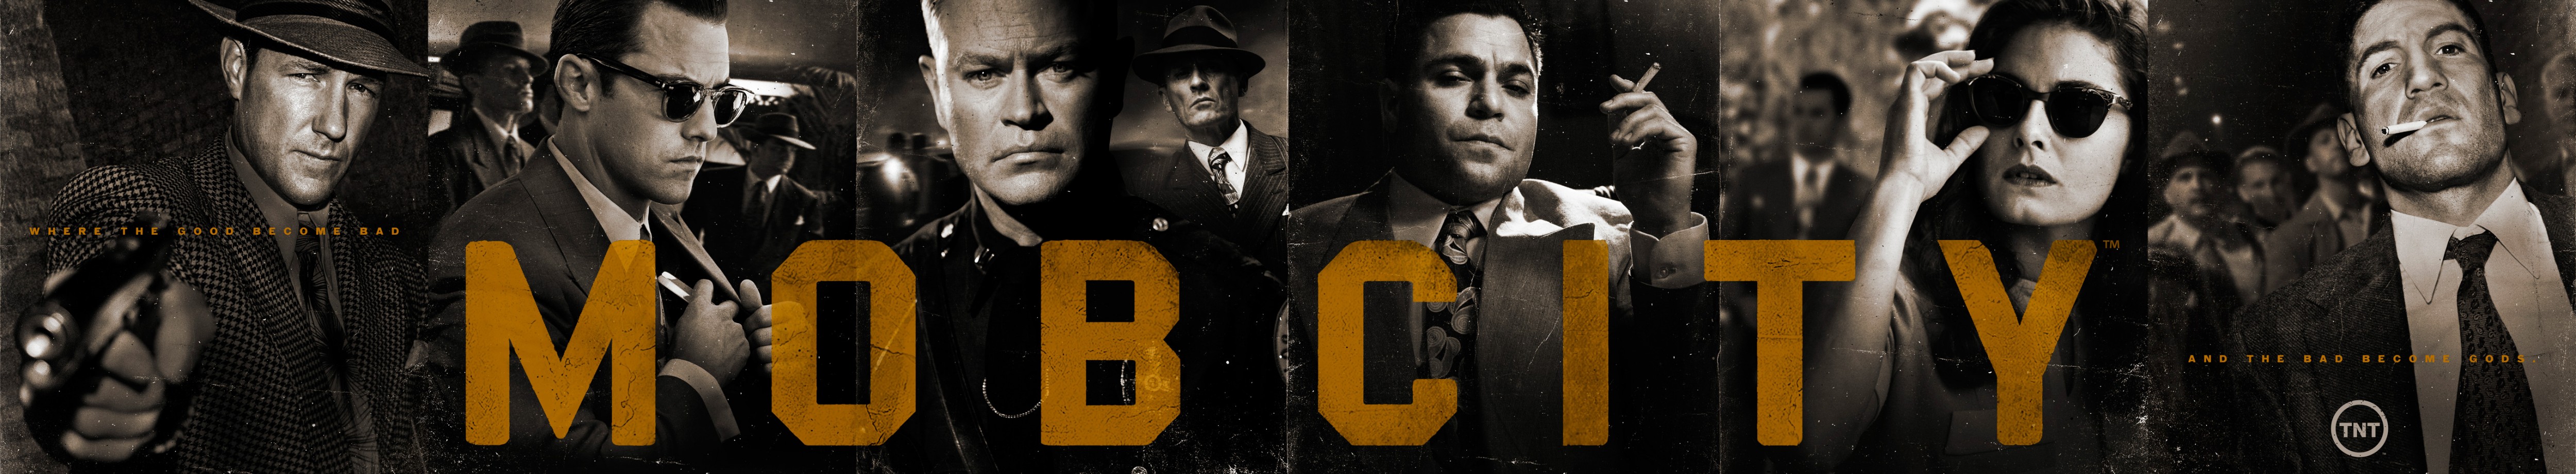 Mega Sized TV Poster Image for Mob City (#8 of 8)